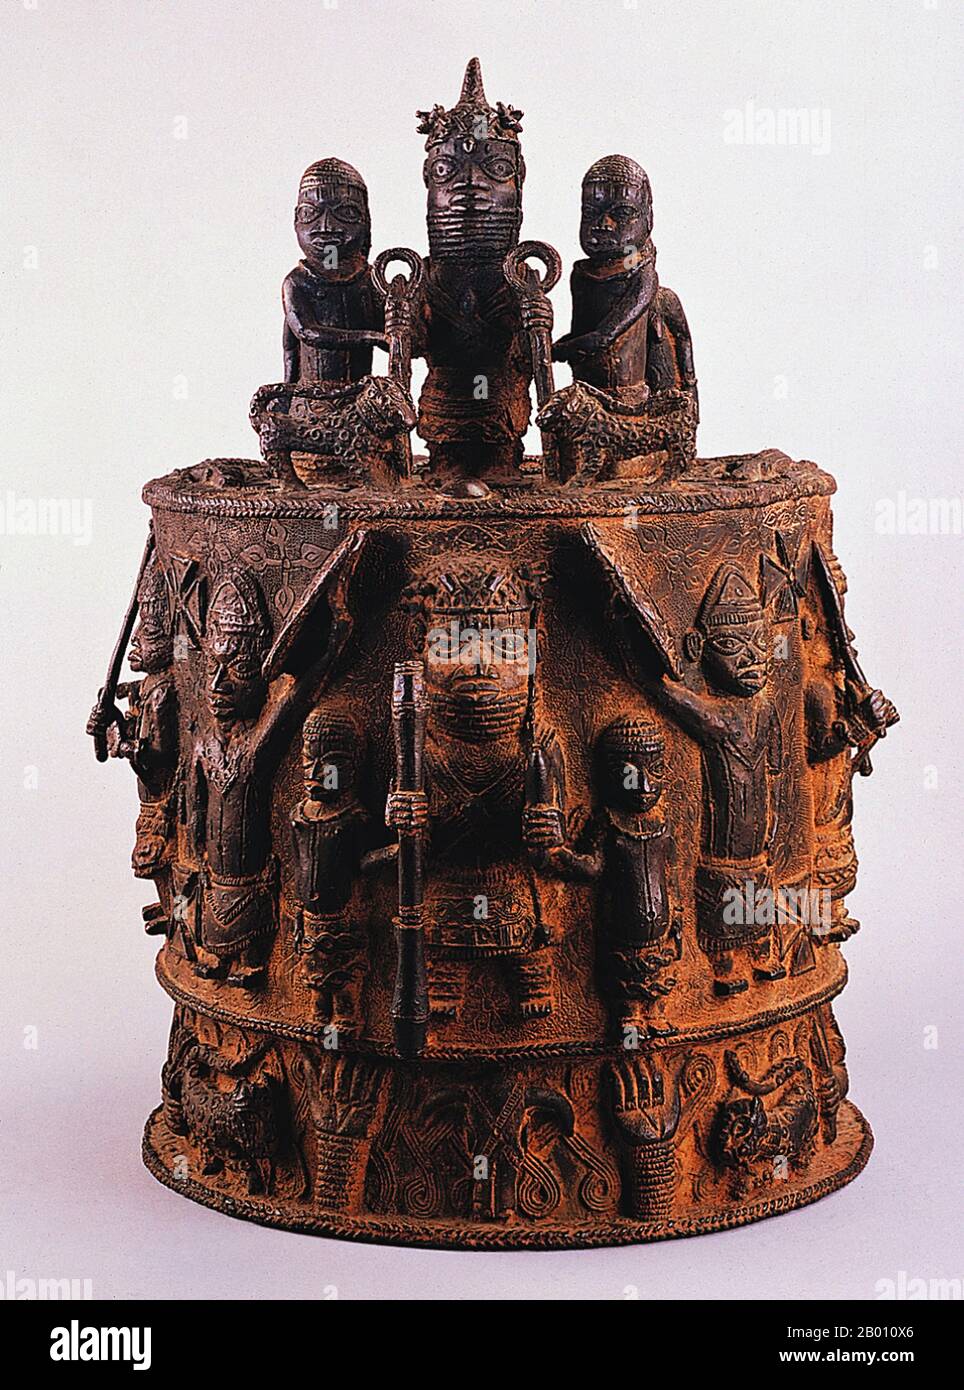 Nigeria: A bronze Edo altar from the Kingdom of Benin,17th to 18th century.  The Benin Empire (1440–1897) was a pre-colonial African state in what is now modern Nigeria. It is not to be confused with the modern-day country called Benin (and formerly called Dahomey). Stock Photo